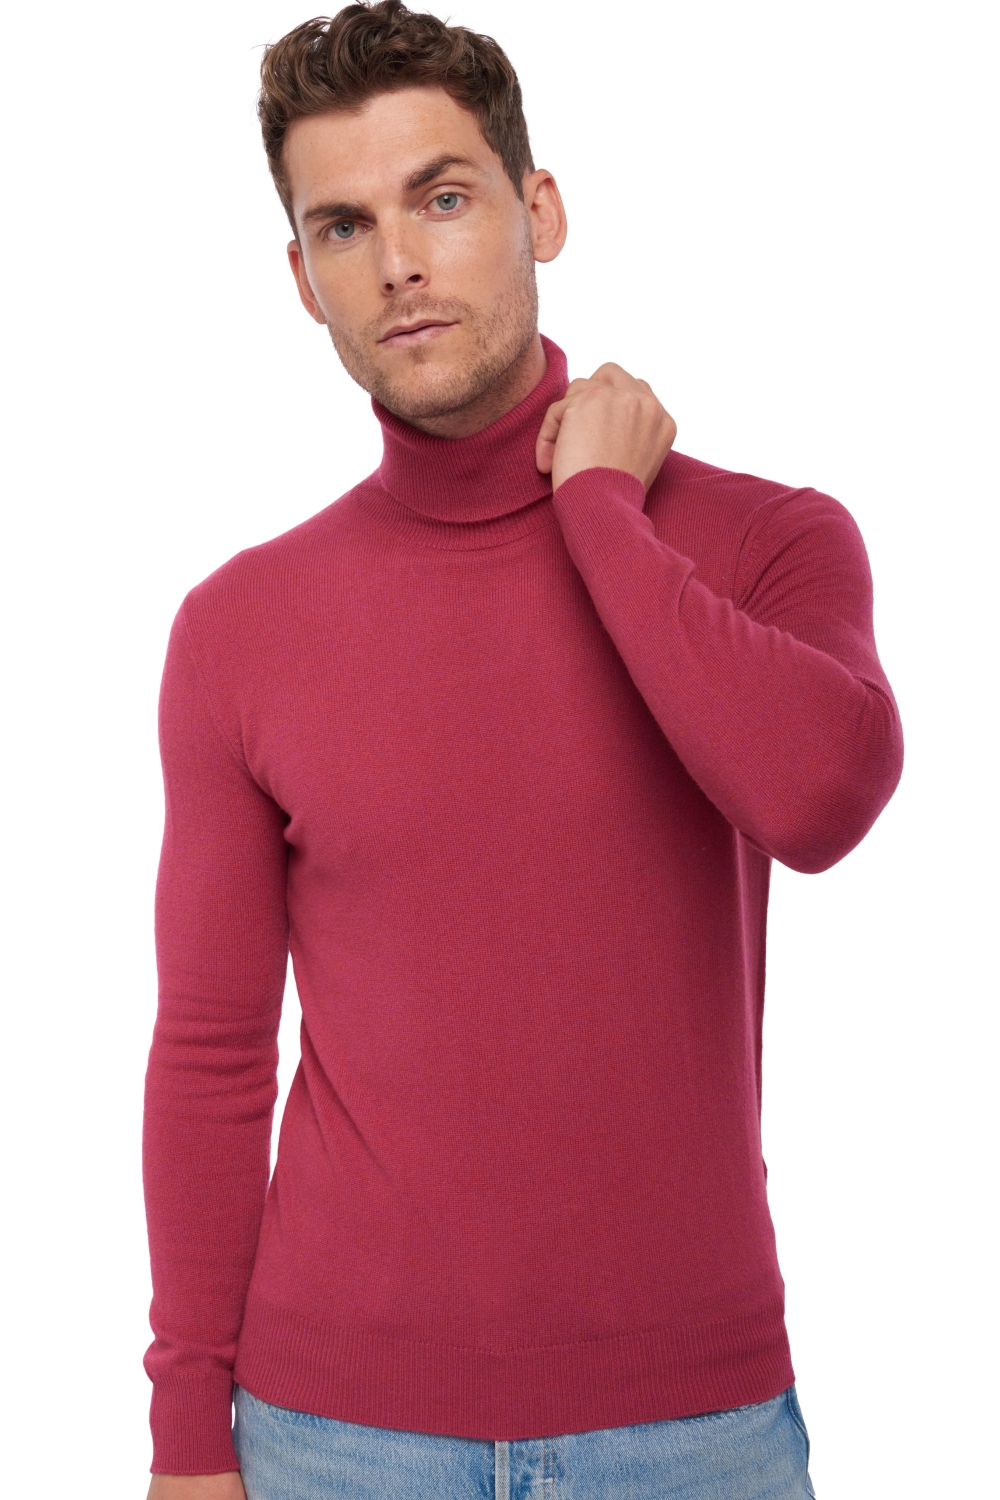 Cashmere men basic sweaters at low prices tarry first highland l